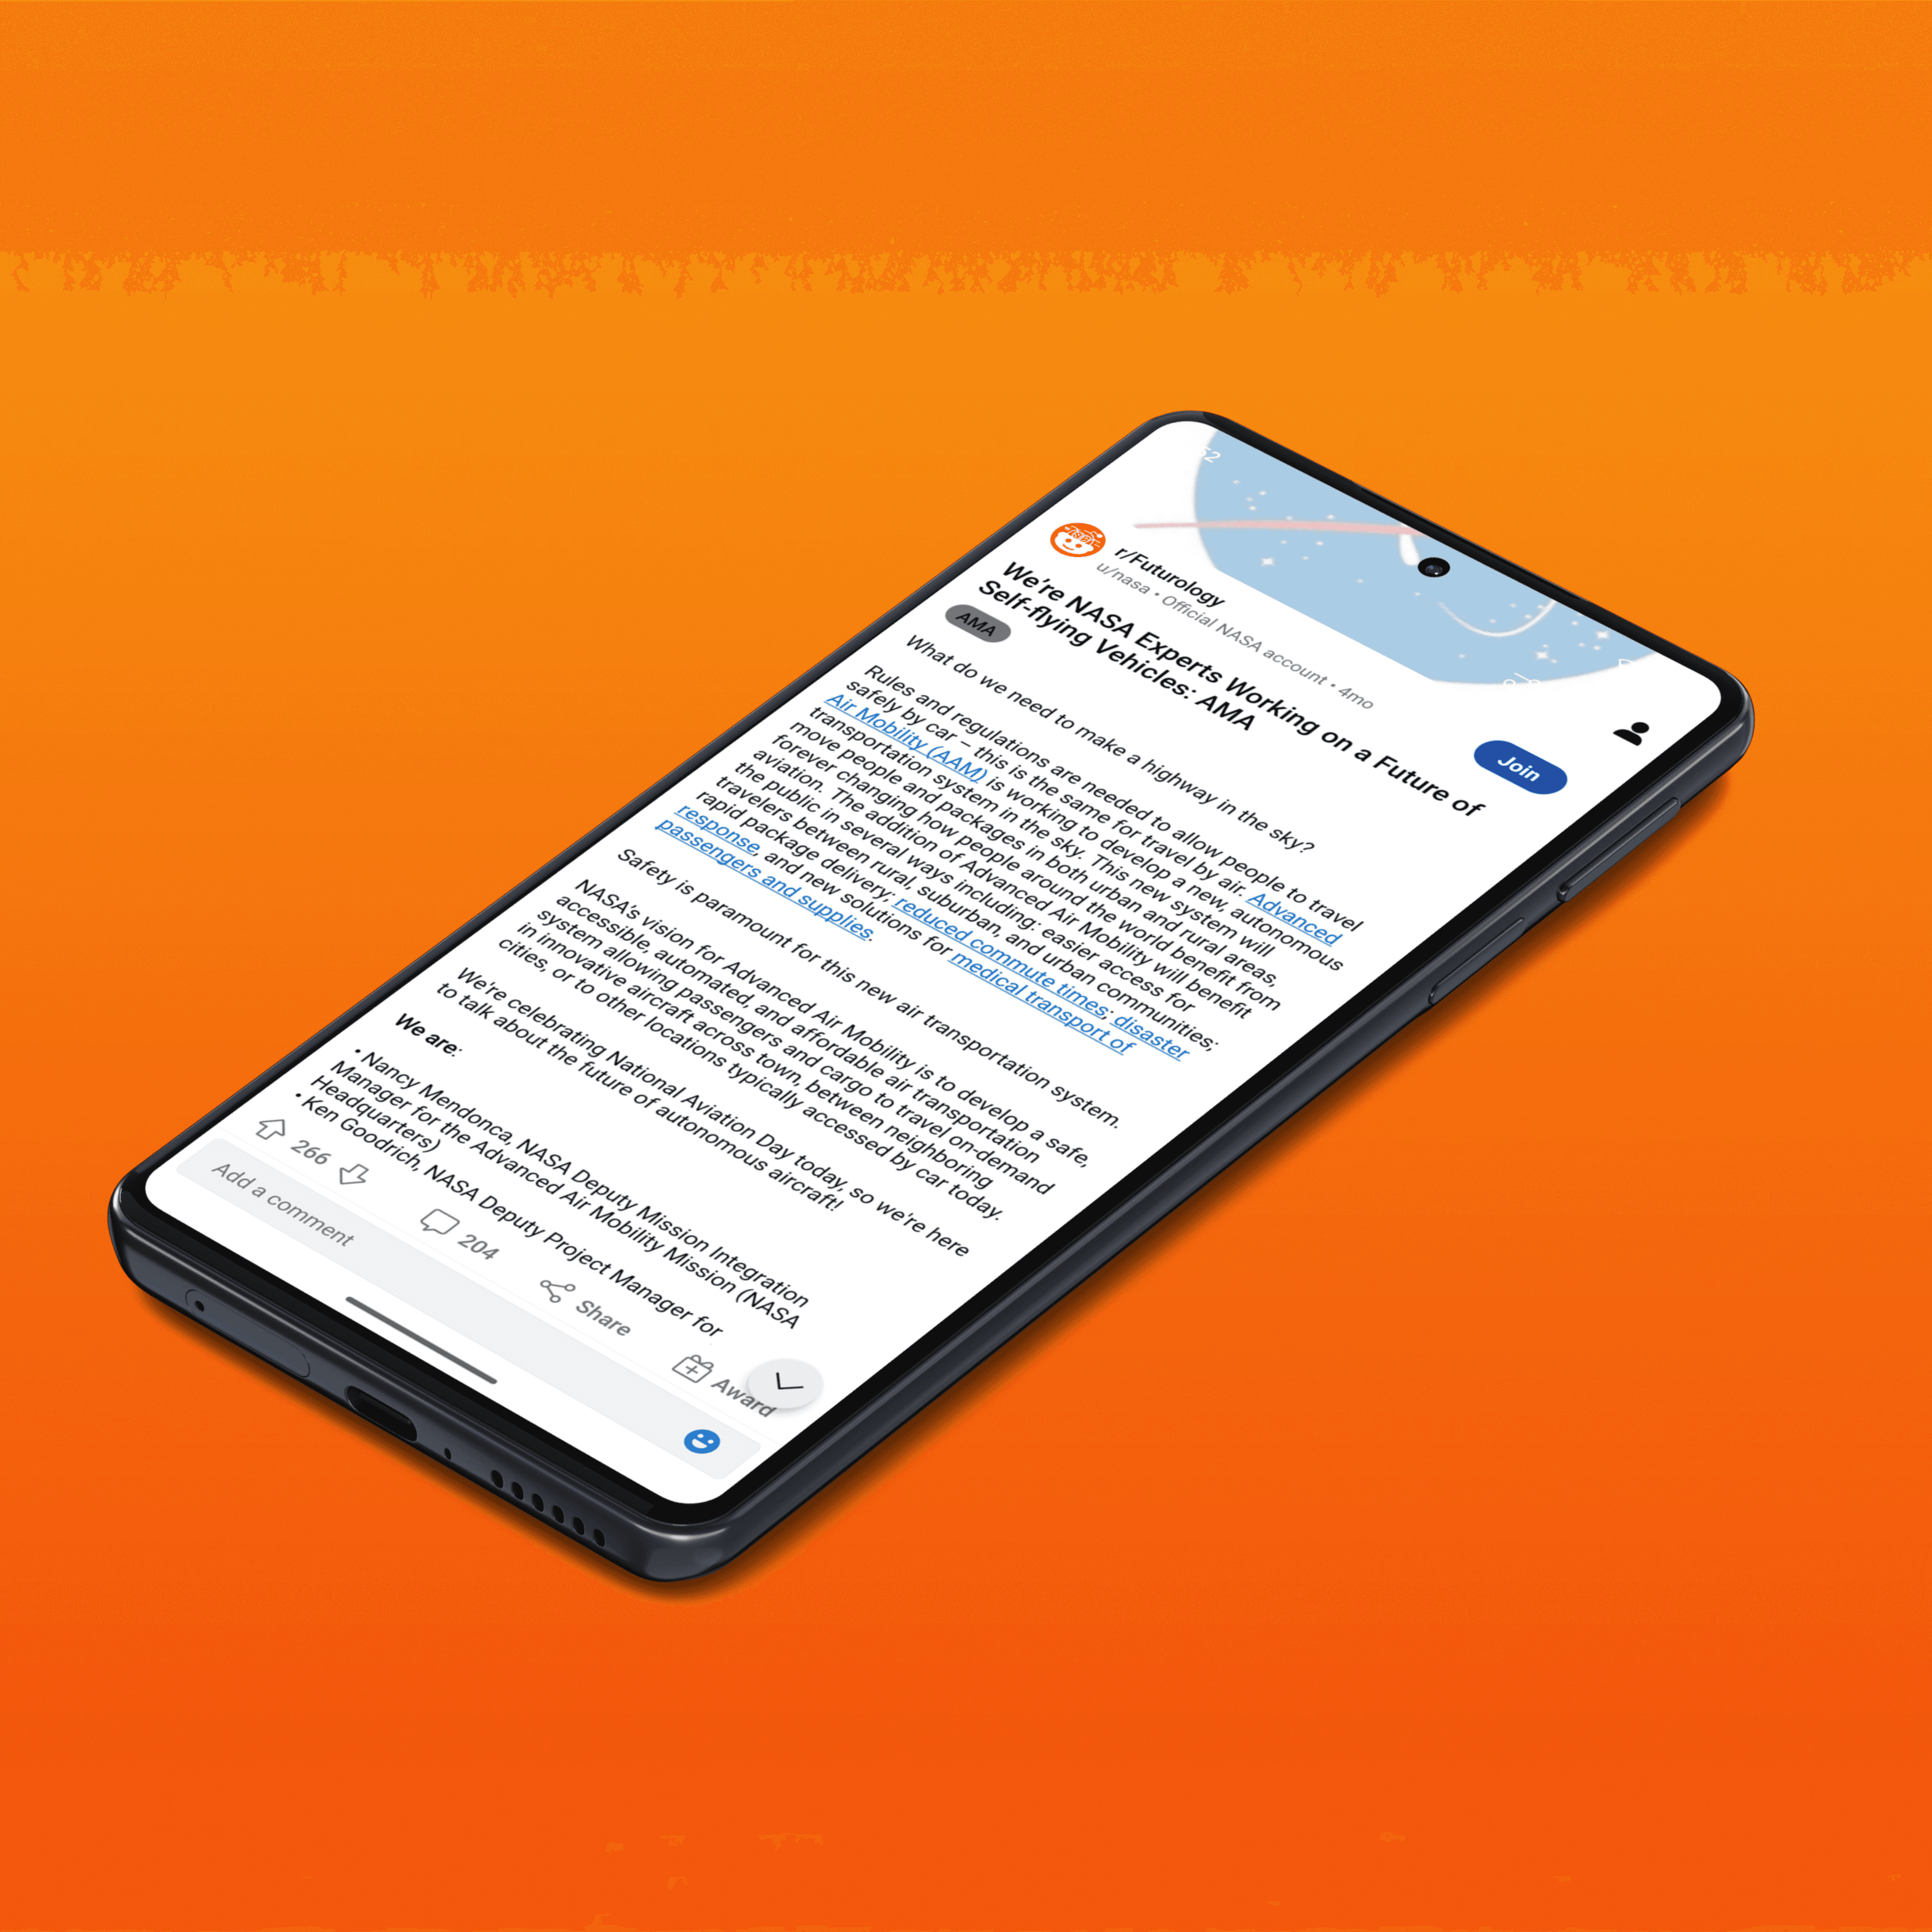 A mockup of a phone and Reddit post reading "We're NASA Experts Working on a Future of Self-flying Vehicles: AMA. The background is orange.